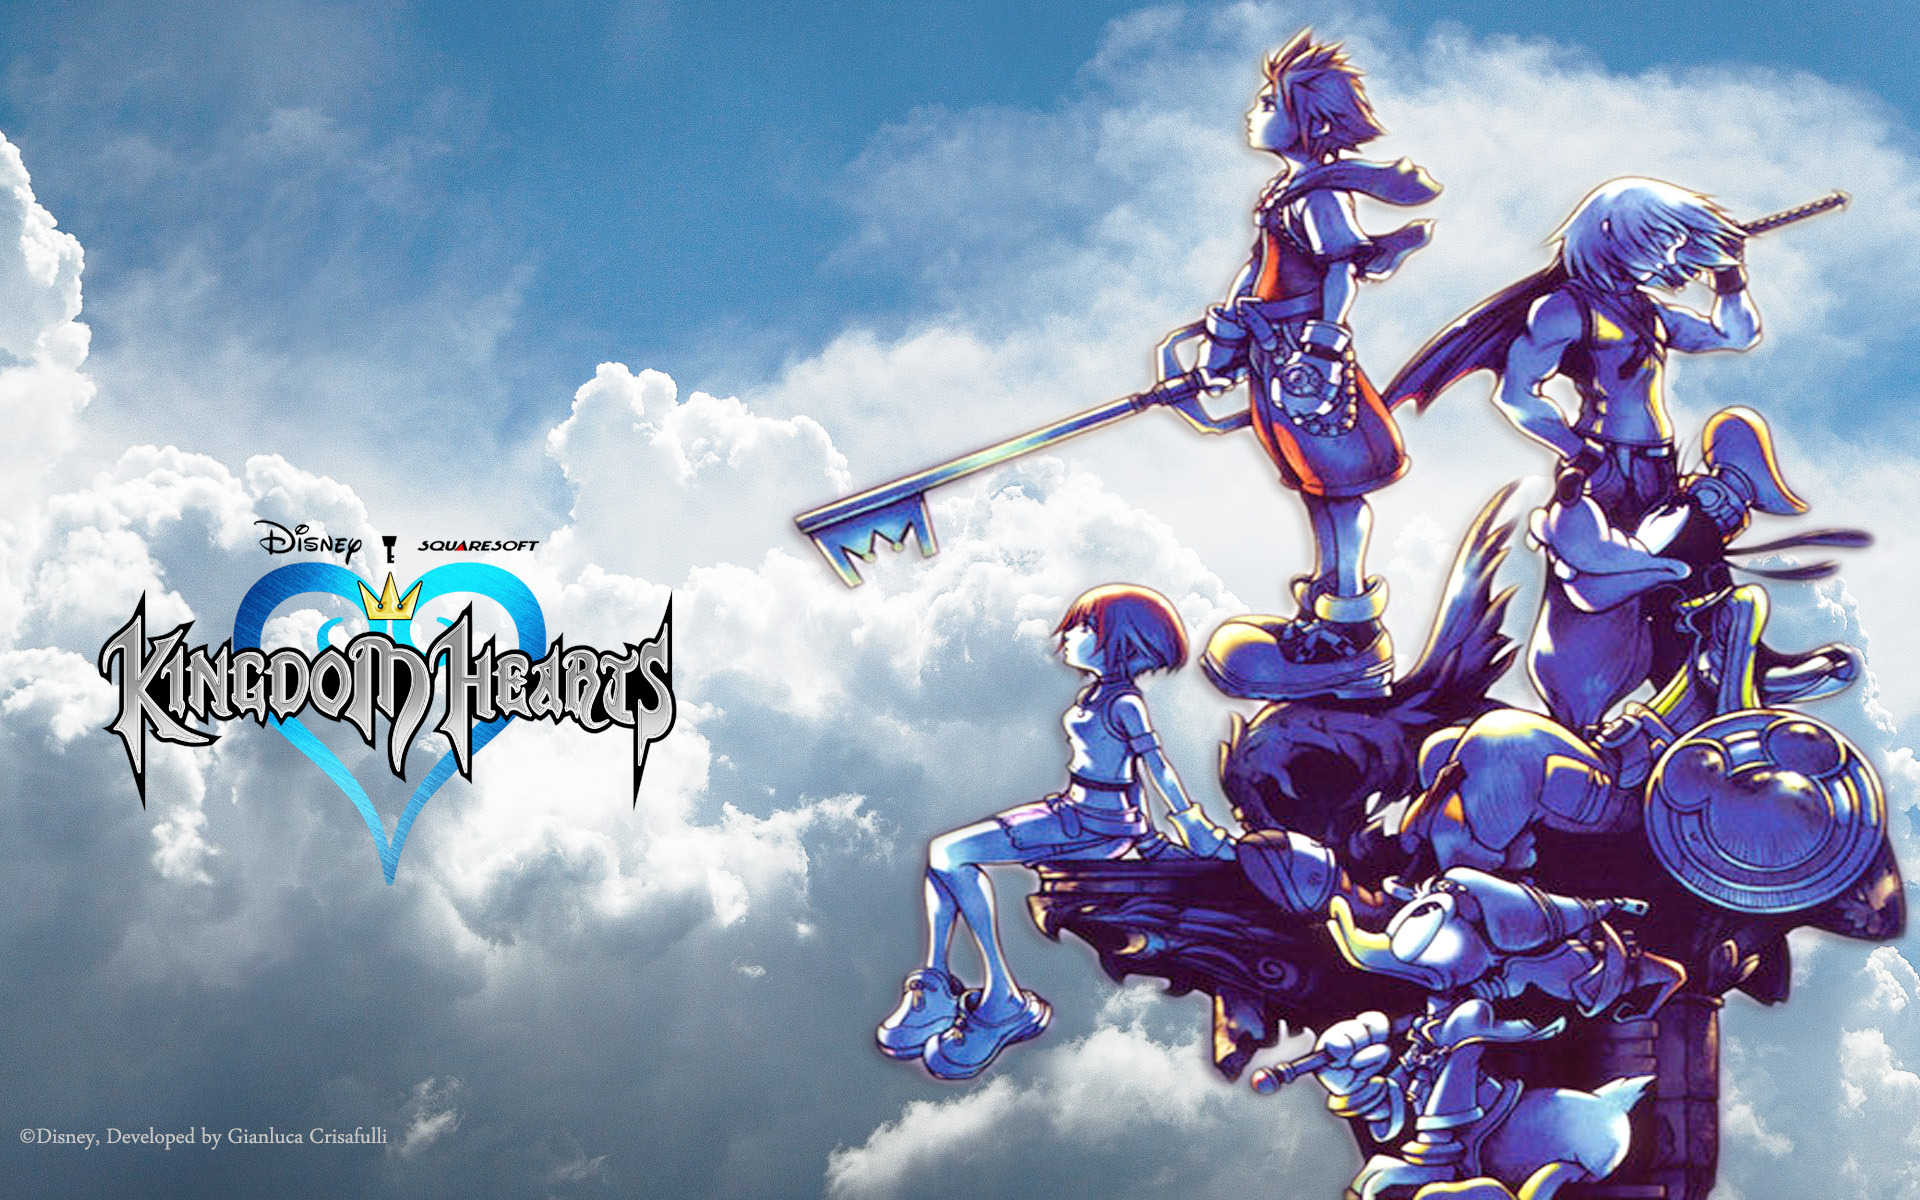 The ‘Kingdom Hearts’ Worlds That Almost Made Us Break Our Controllers